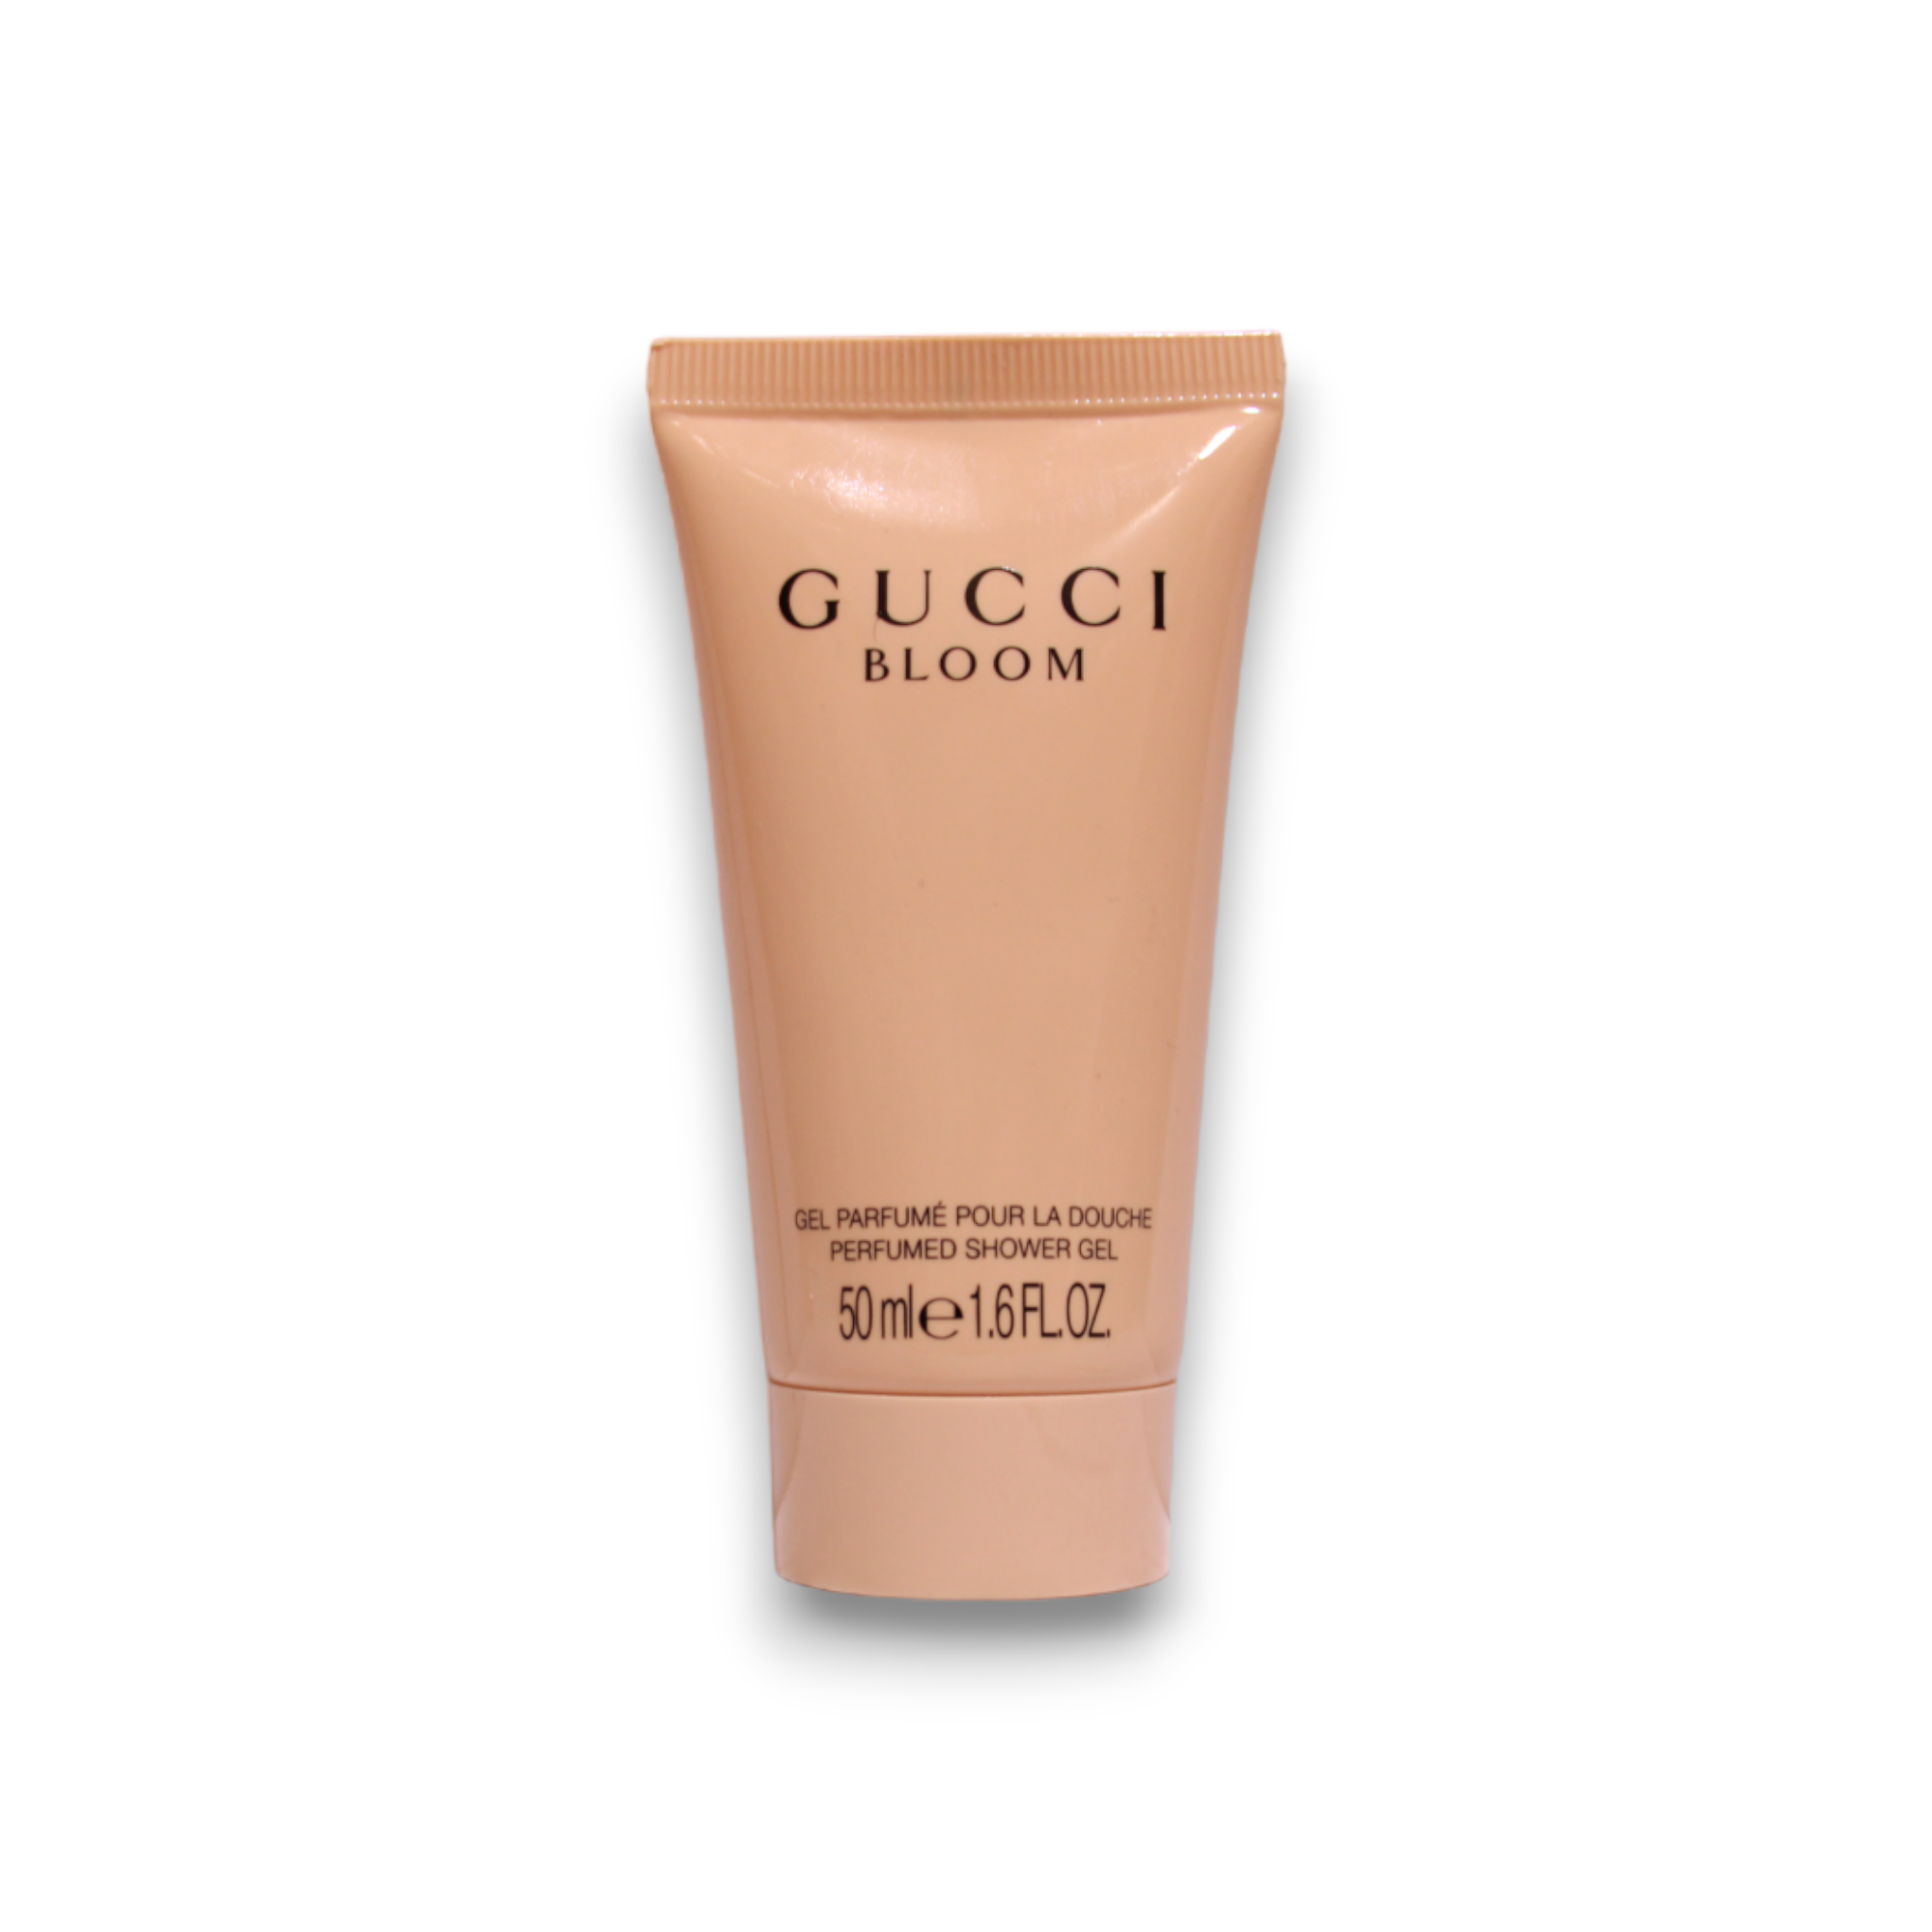 Gucci, Bloom, Hydrating, Shower Gel, All Over The Body, 50 ml